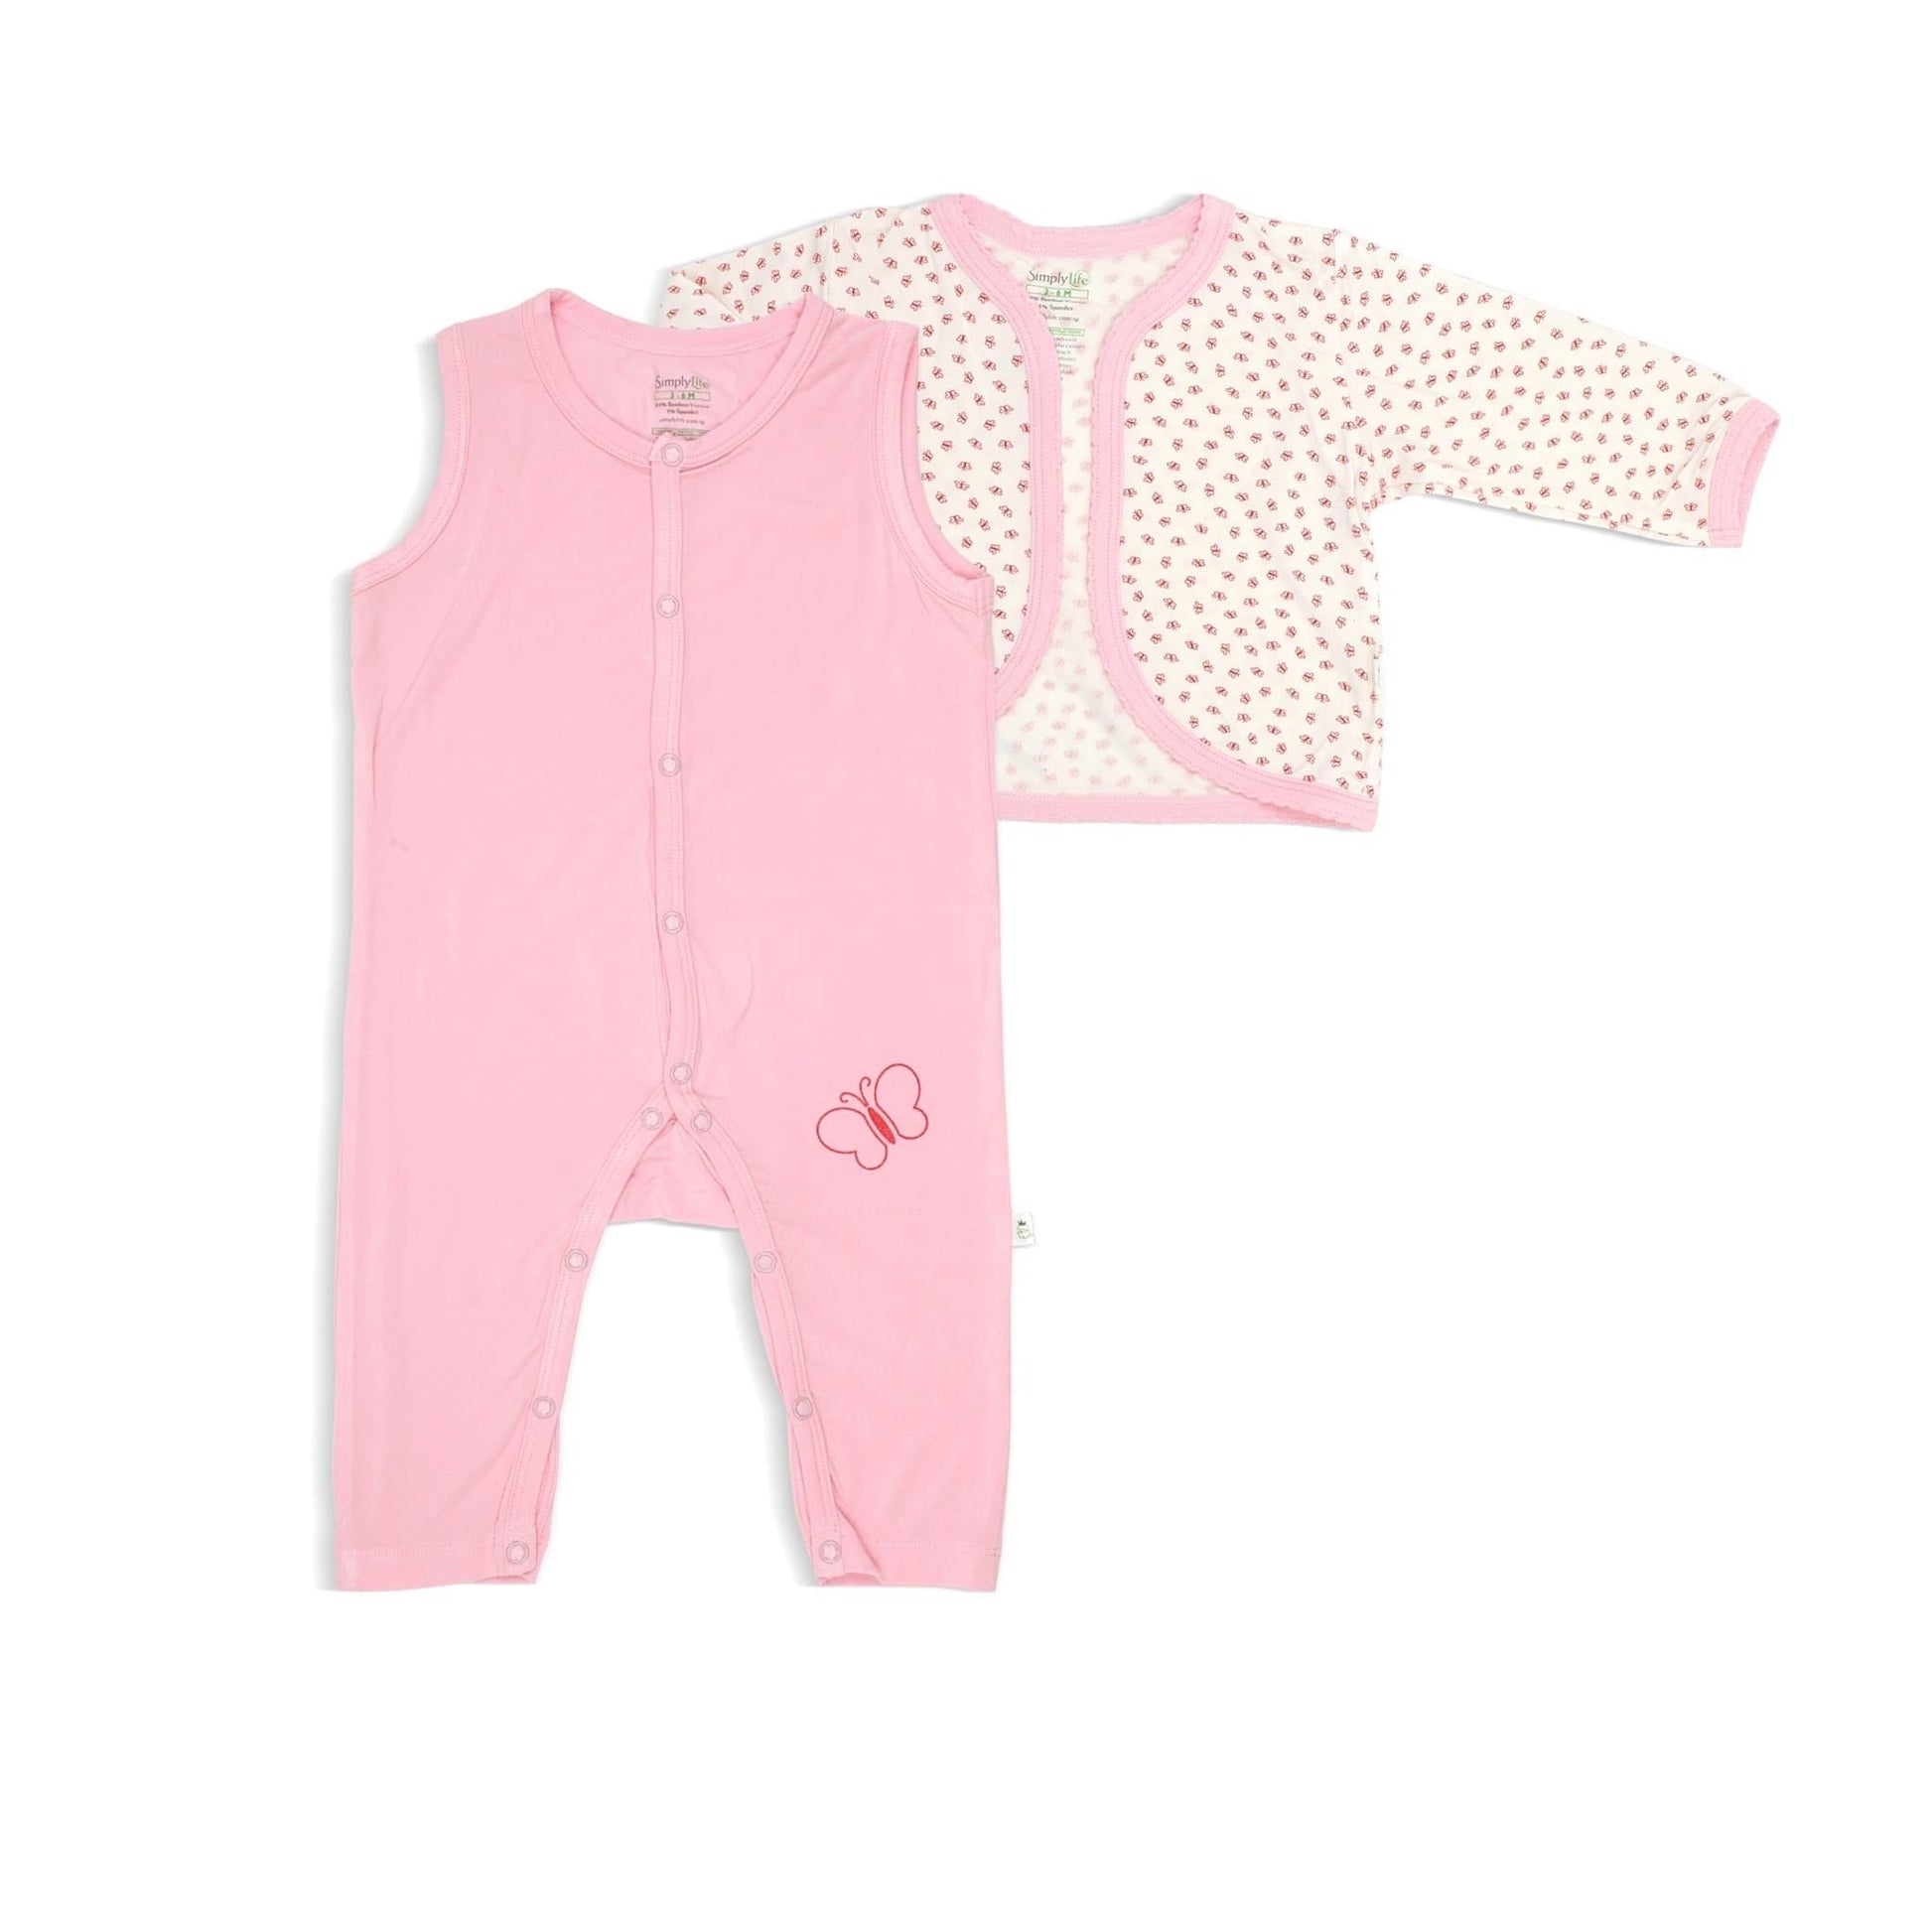 Lovely Butterflies - Sleepsuit with Cardigan (2-pc Set) by simplylifebaby